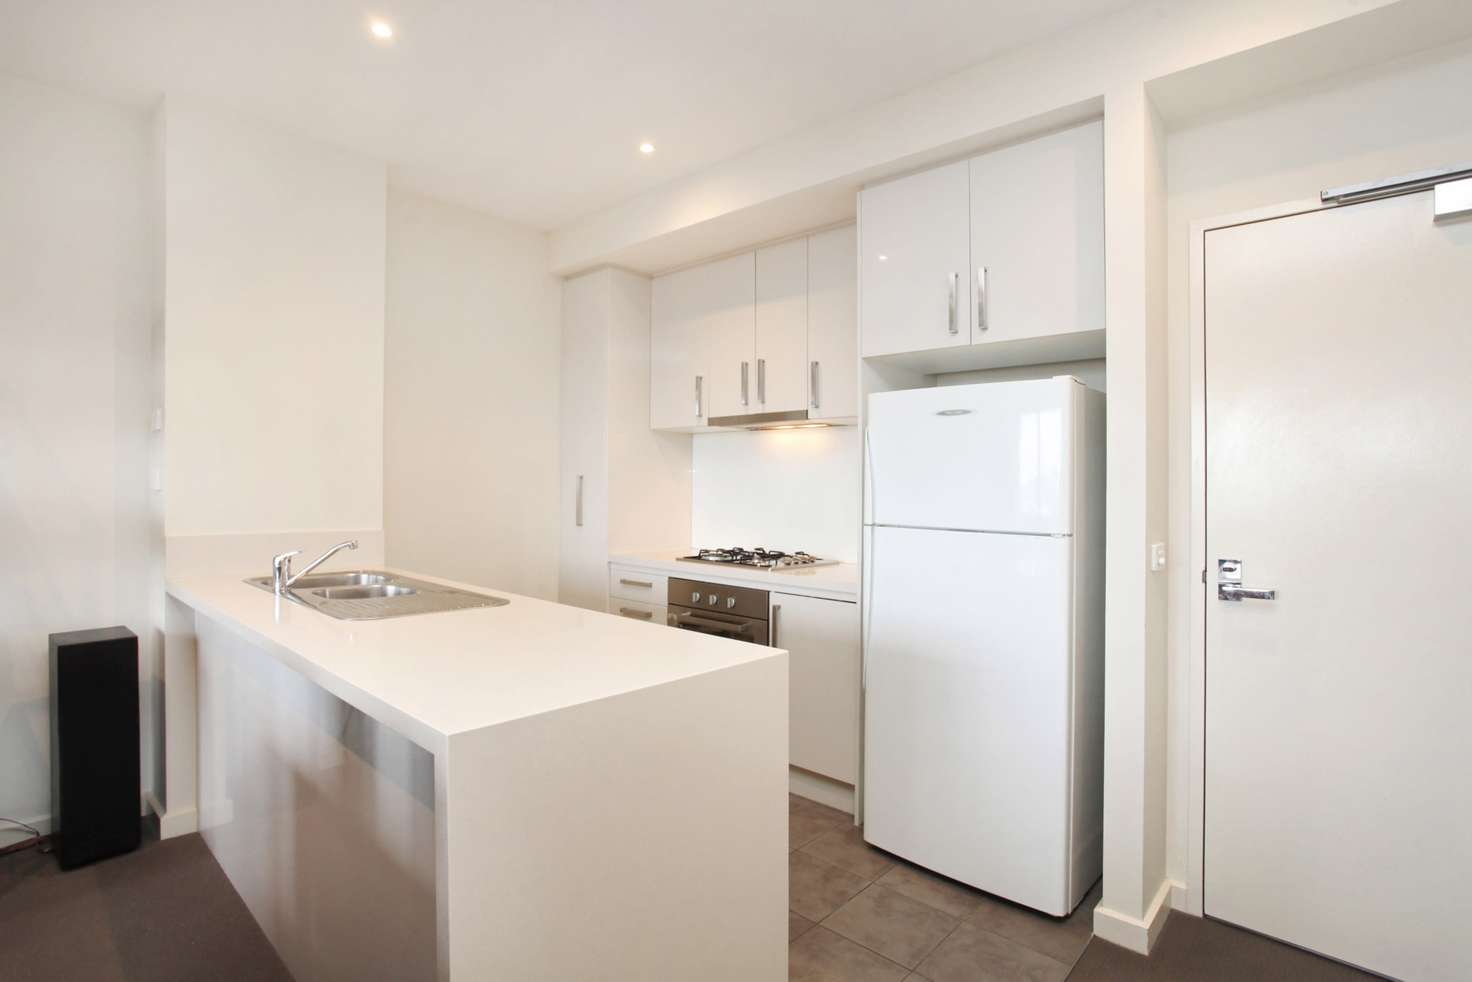 Main view of Homely apartment listing, 212/8 Burrowes, Ascot Vale VIC 3032